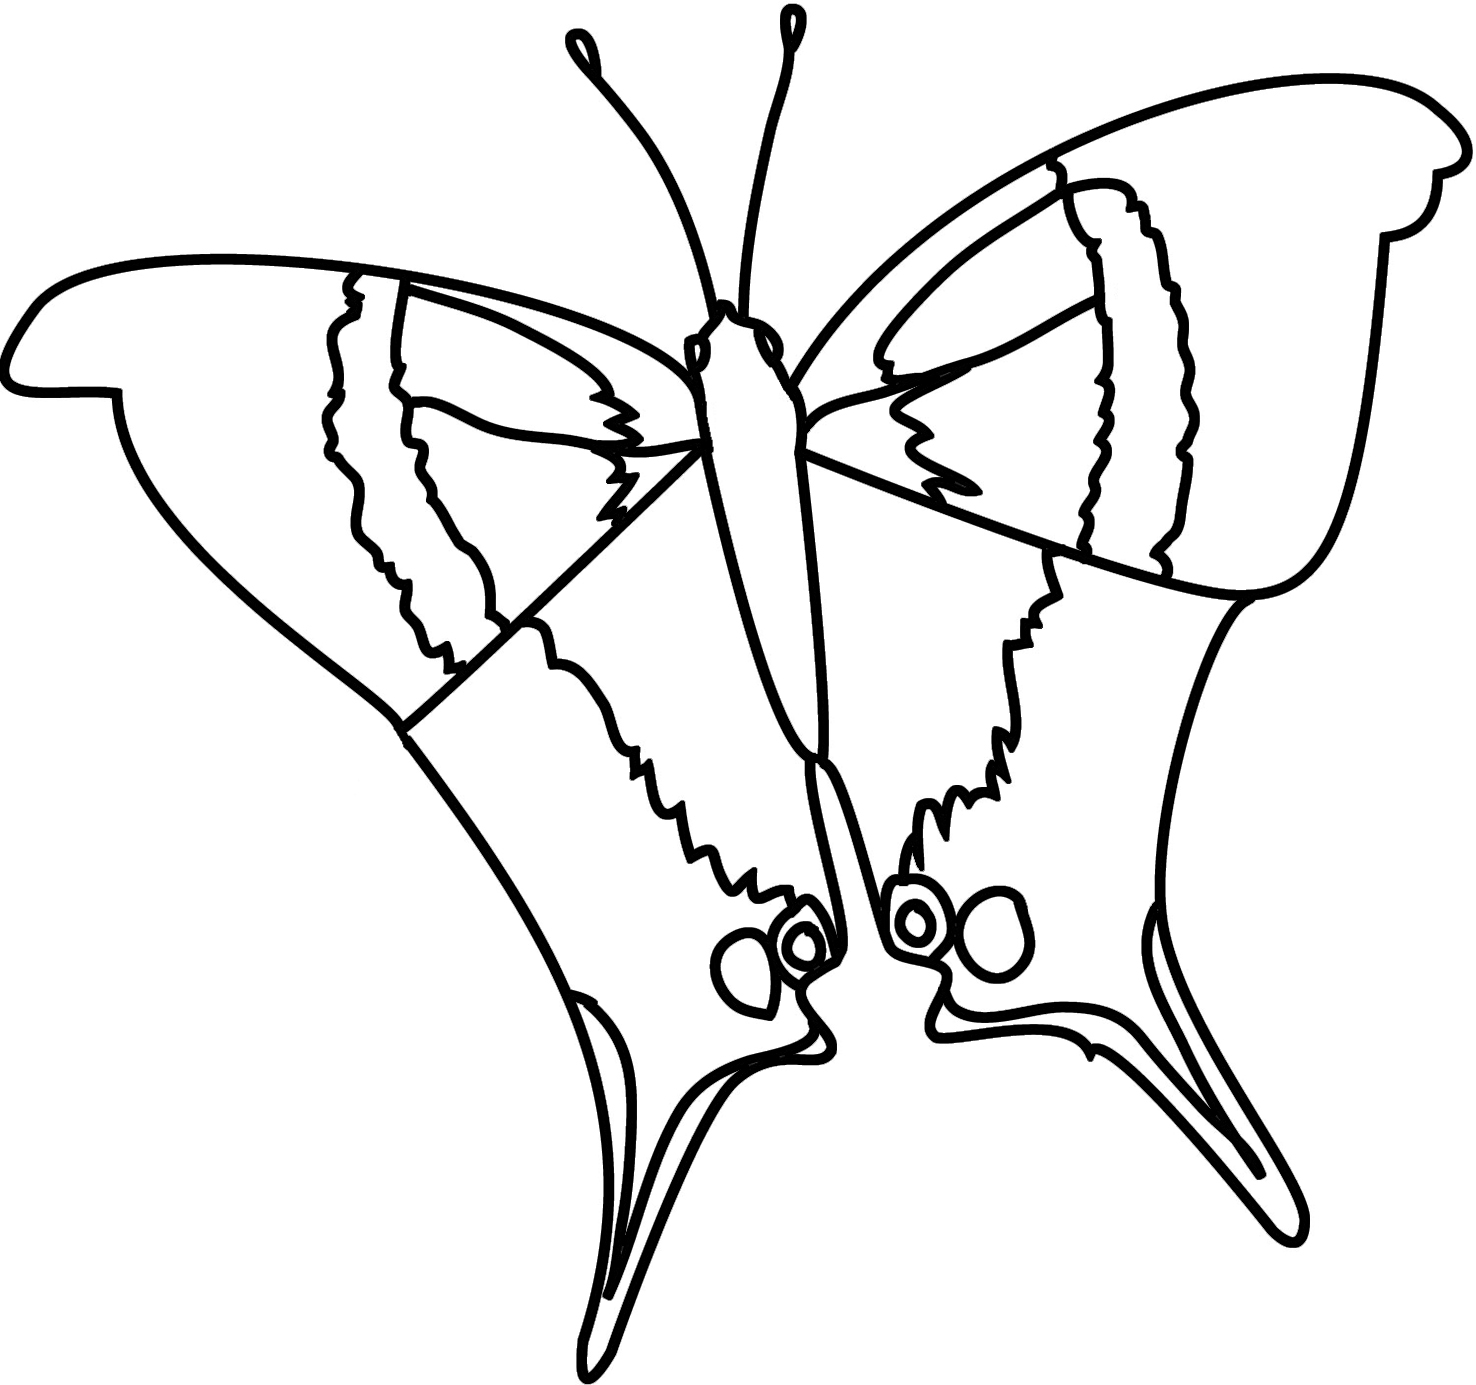 Marpesialoloe-butterfly-coloring